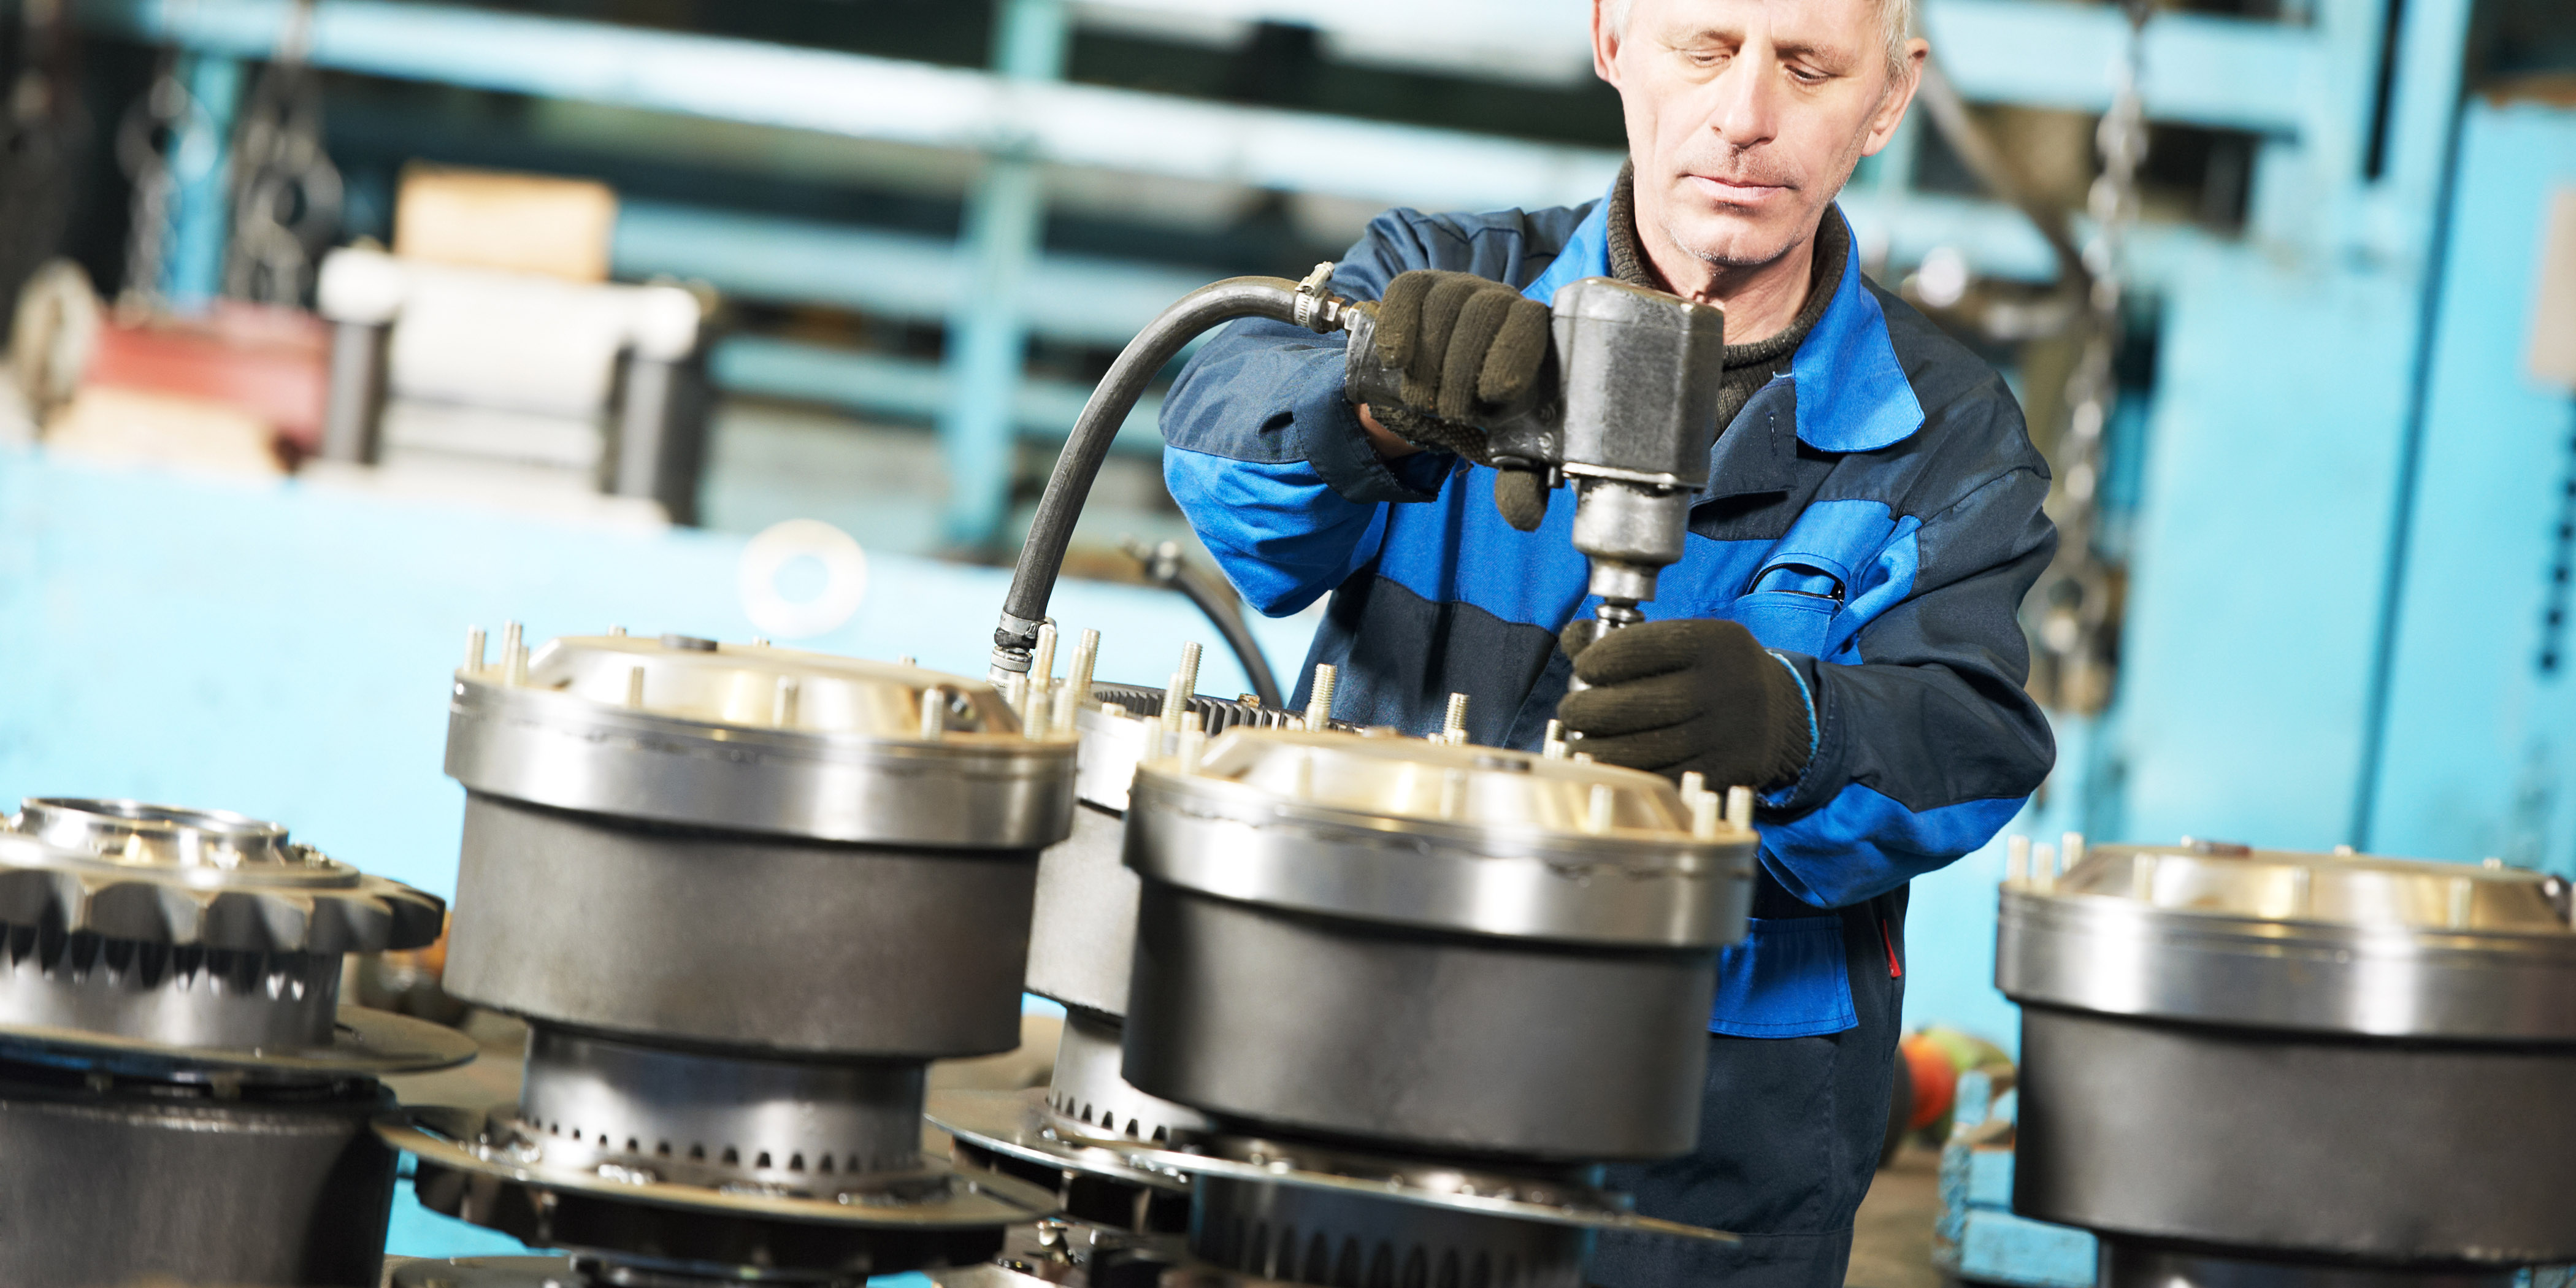 Assembling castings, forgings and bearings into one custom made product according to your specifications